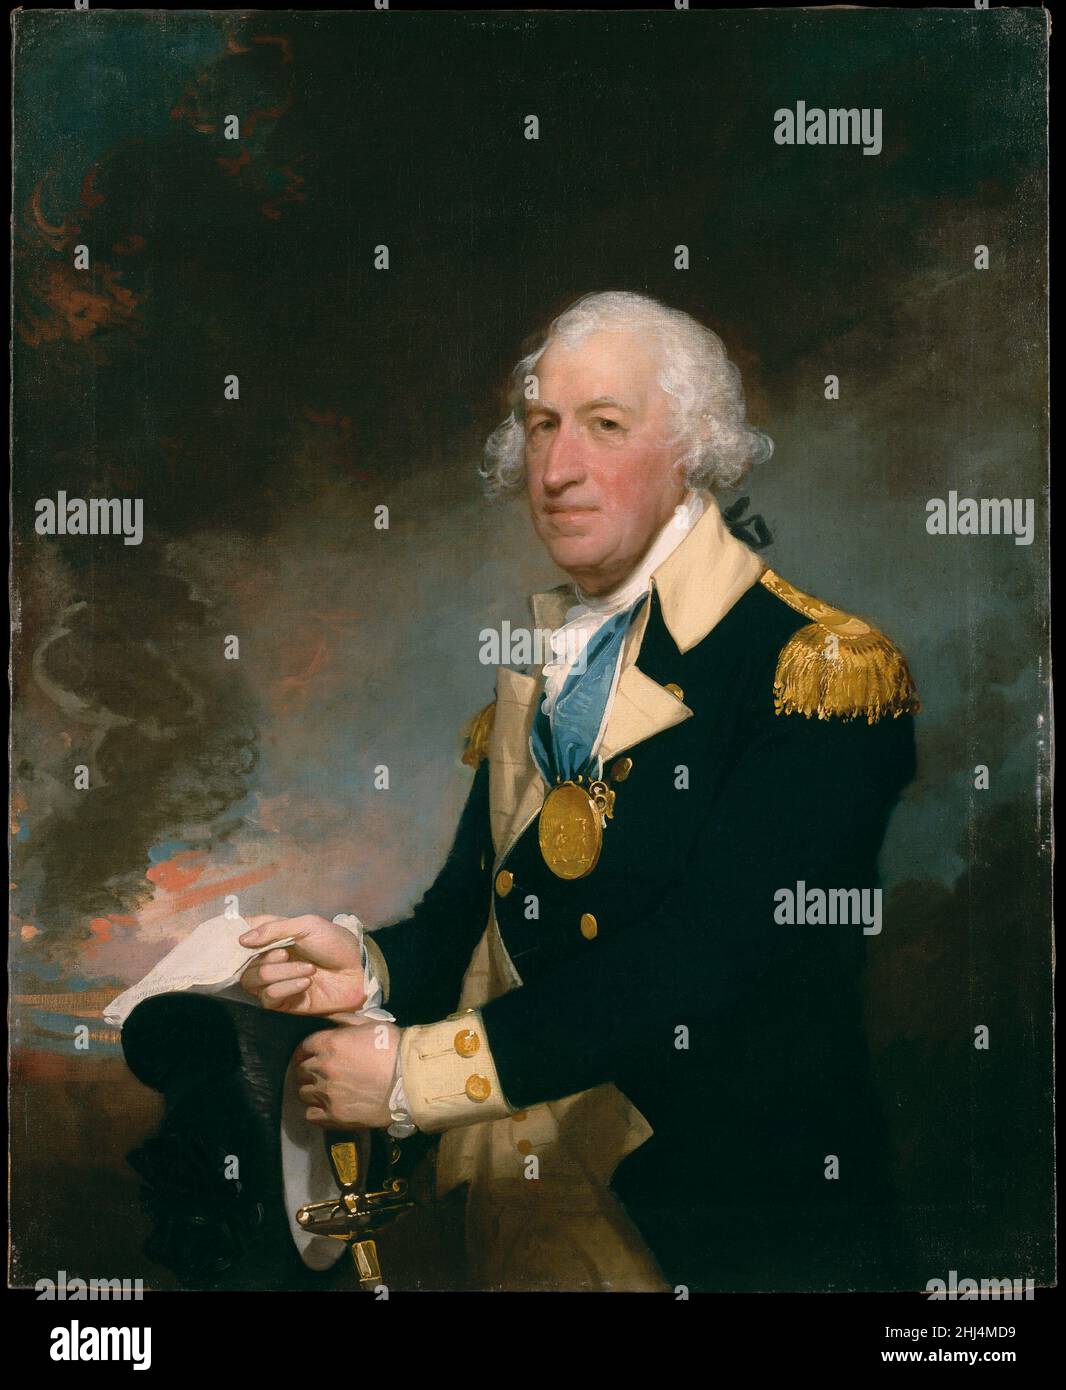 Horatio Gates ca. 1793–94 Gilbert Stuart American This portrait, representing Revolutionary War hero General Horatio Gates (1728–1806), was painted long after he led his troops to victory at the Battle of Saratoga in 1777. Although his military career was turbulent, the English-born Gates is represented in the uniform of a brigadier general, decorated with the medal that Congress ordered struck to commemorate his triumph at Saratoga. In his hand is a copy of the Saratoga Convention. The painting descended in the family of Gates' good friend, Colonel Ebenezer Stevens. The work is a blend of Stu Stock Photo